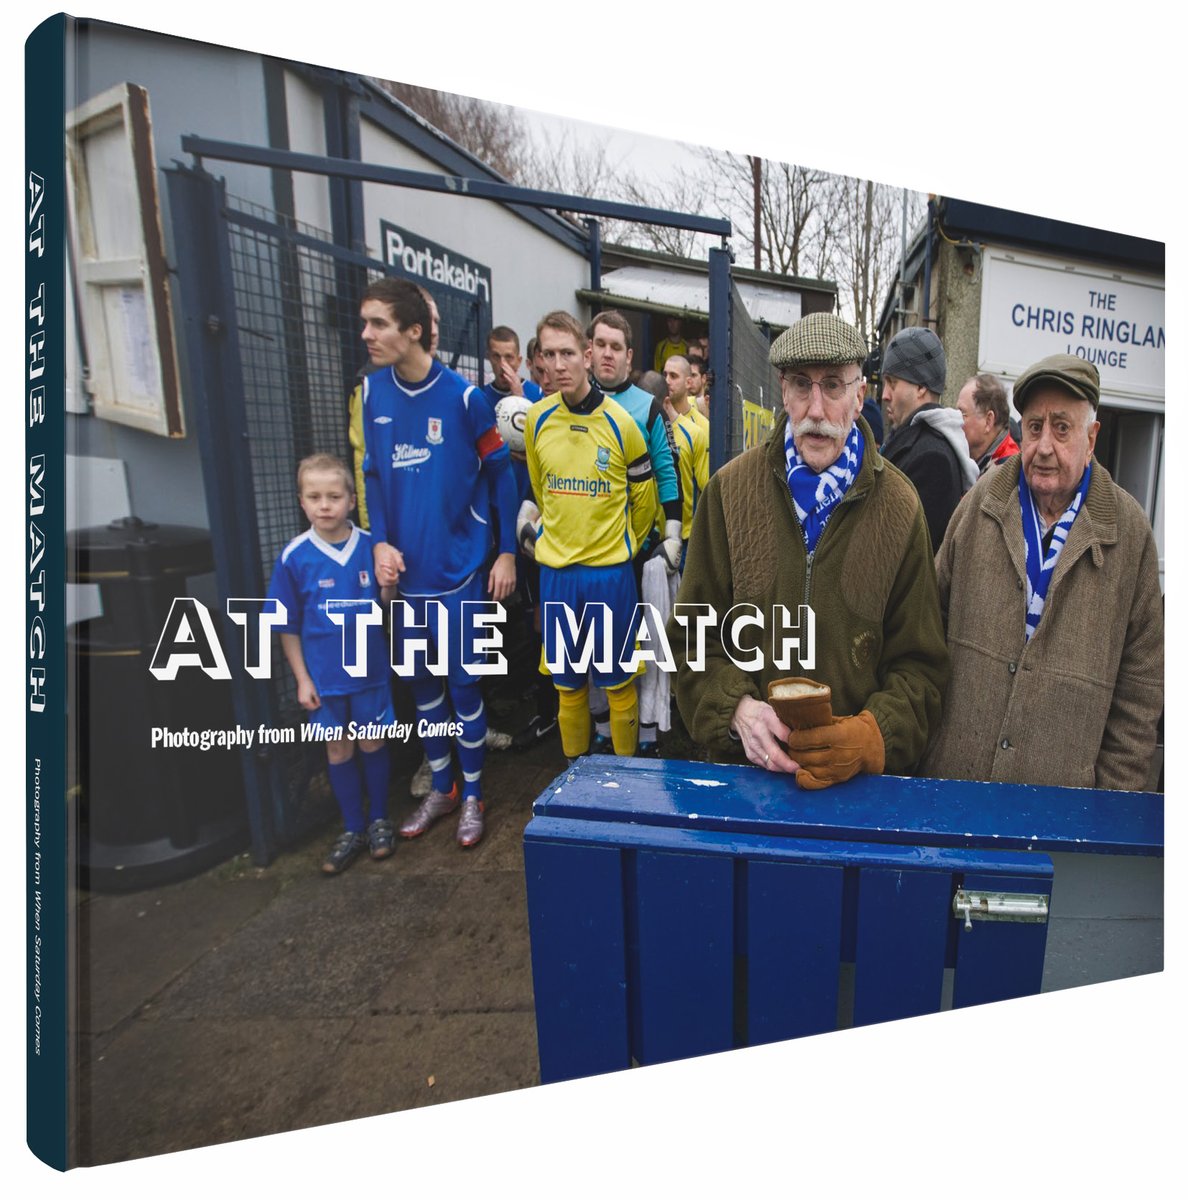 AT THE MATCH, a landmark photobook celebrating two decades of images captured by our team of photographers, will be published in May this year. Pre-order now to secure your copy: wsc.co.uk/shop/at-the-ma…